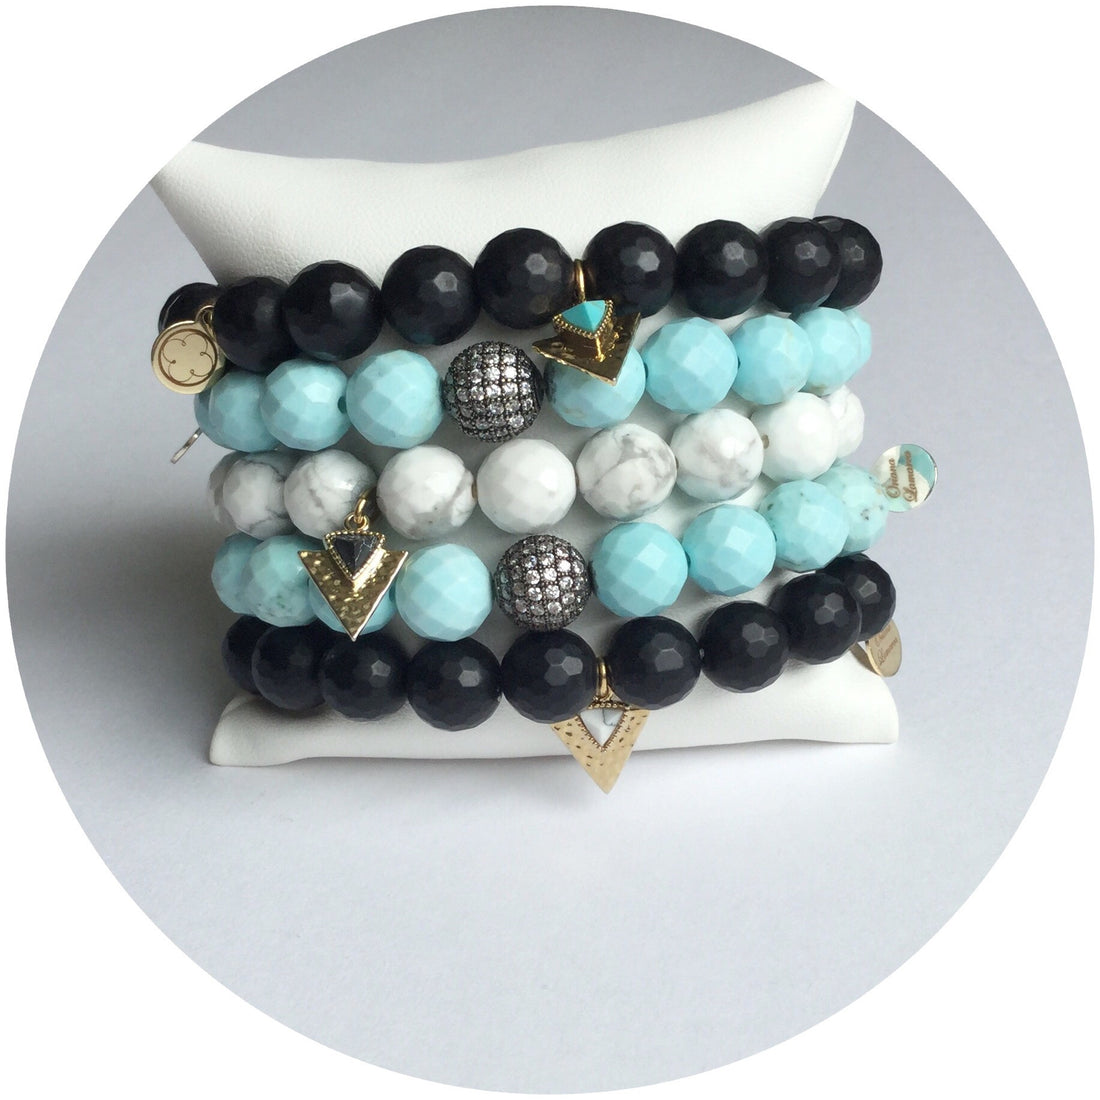 Strong &amp; Sophisticated Armparty - Oriana Lamarca LLC